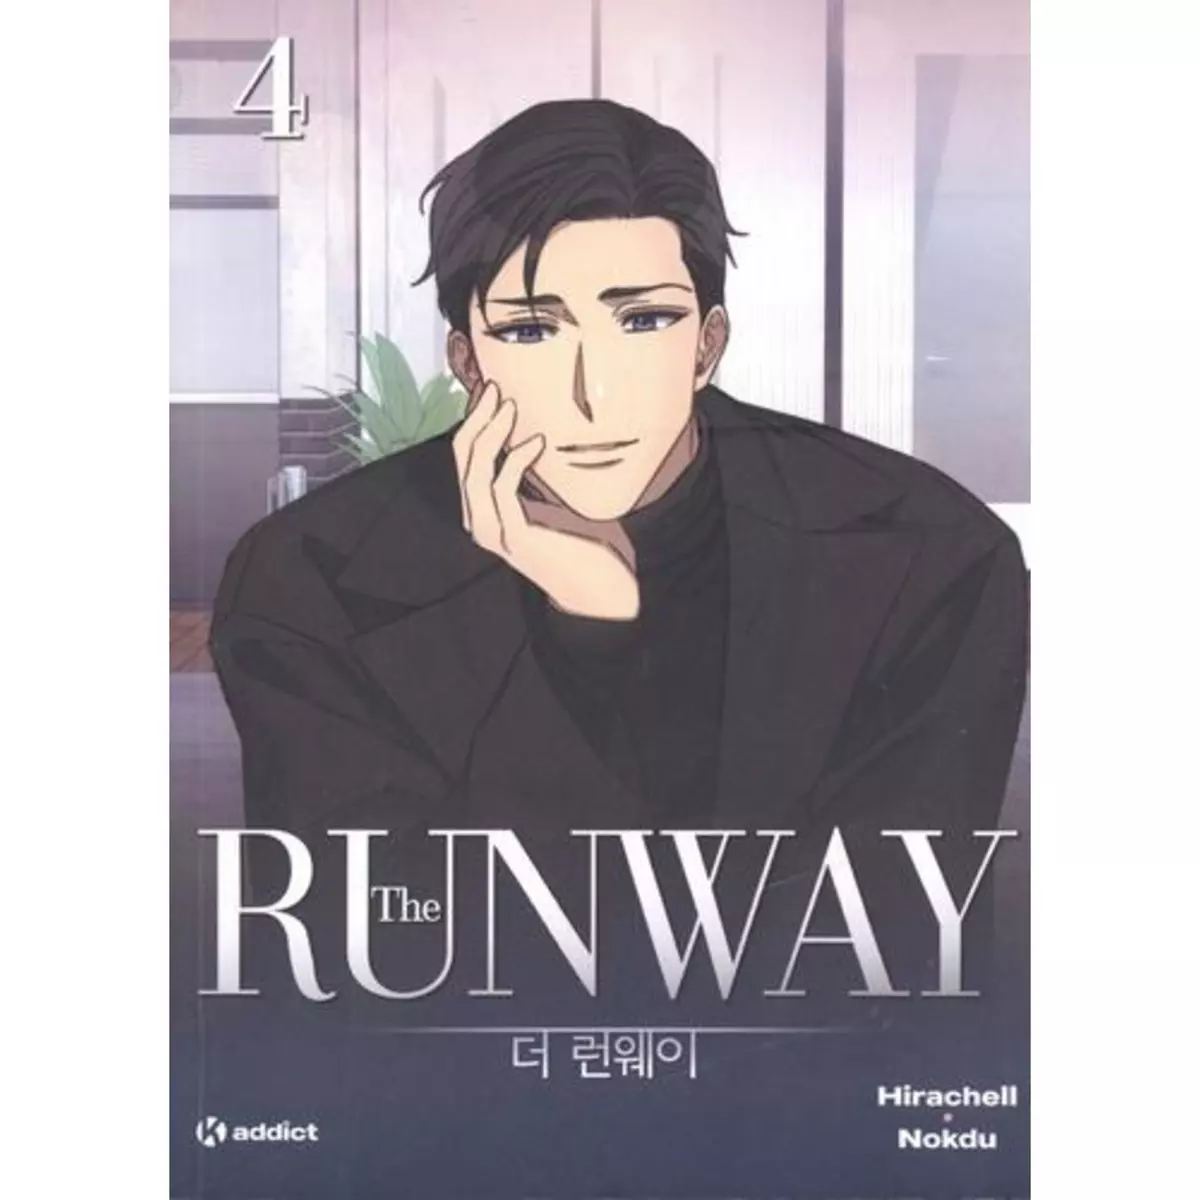  THE RUNWAY TOME 4 , Hirachell